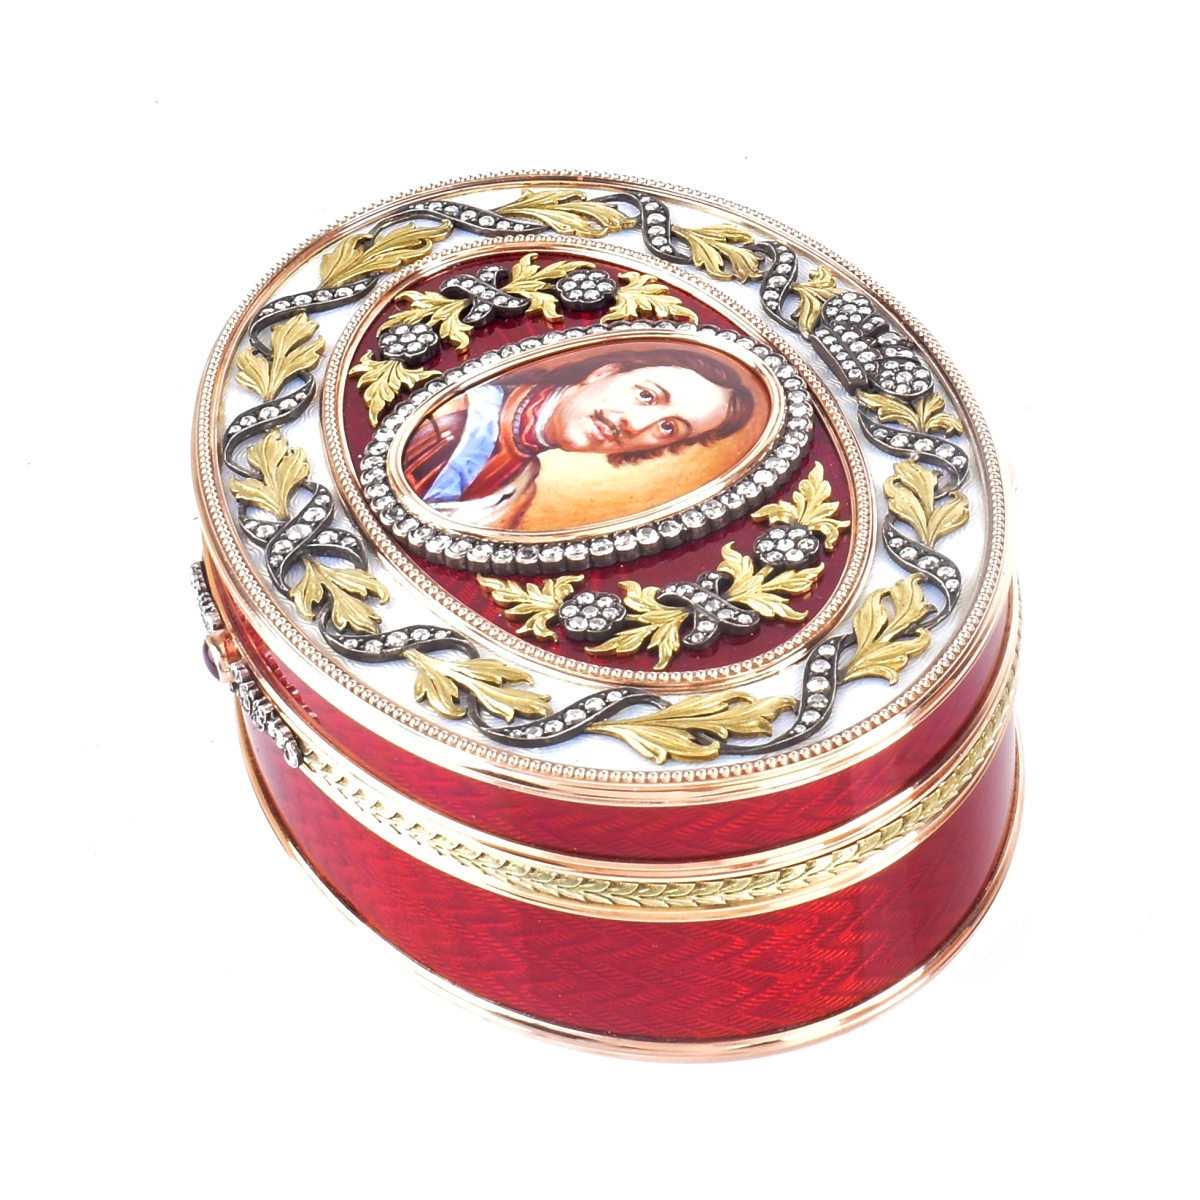 Contemporary Faberge 14K Gold and Enamel Box